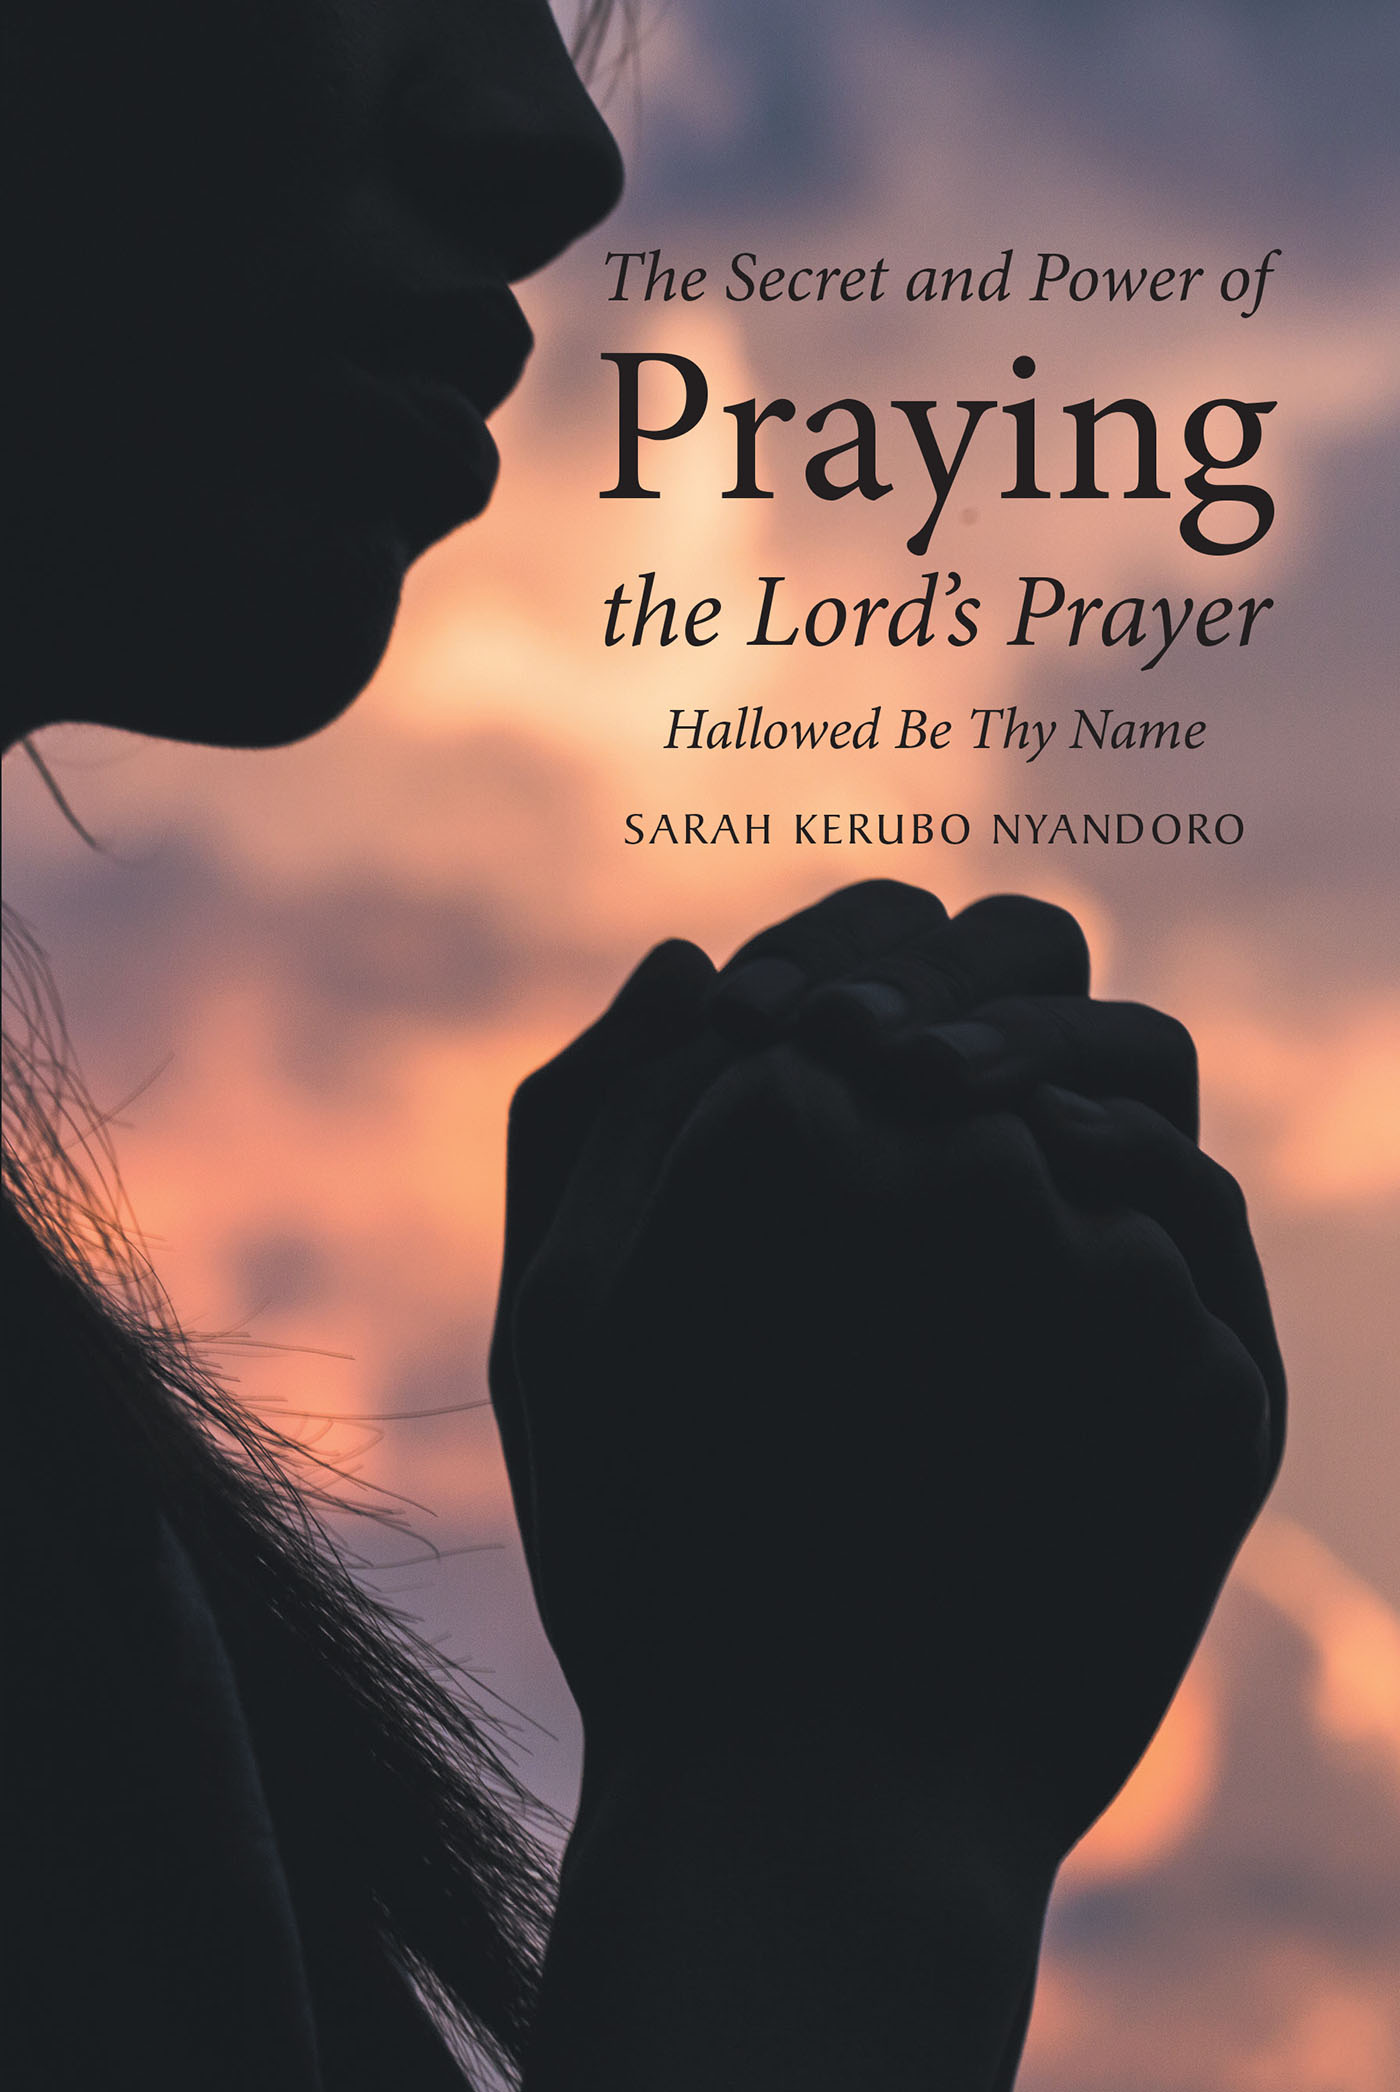 Sarah Kerubo Nyandoro’s Newly Released "The Secret and Power of Praying the Lord’s Prayer: Hallowed Be Thy Name" is an Encouraging Discussion of Prayer